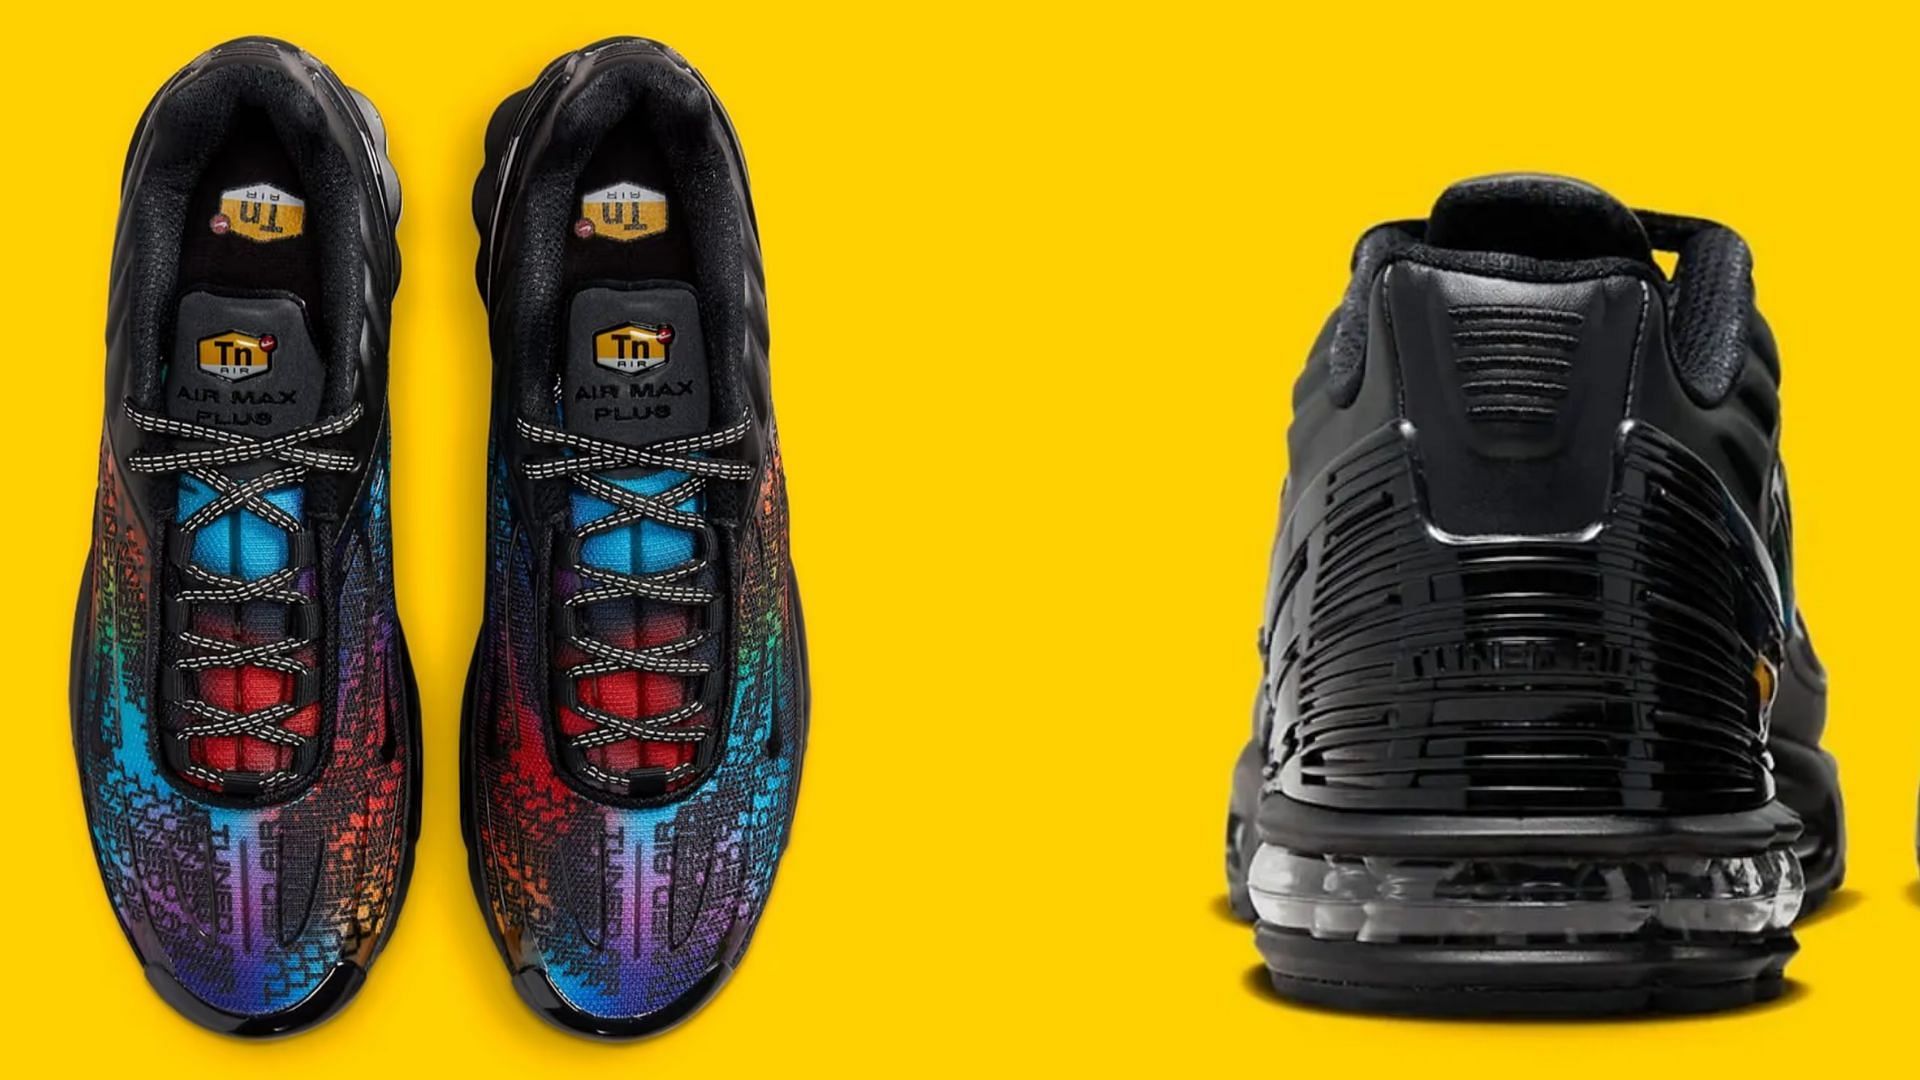 Upcoming Nike Air Max Plus 3 gradient Tuned Air playful sneakers in rainbow color palette (Image via Nike)